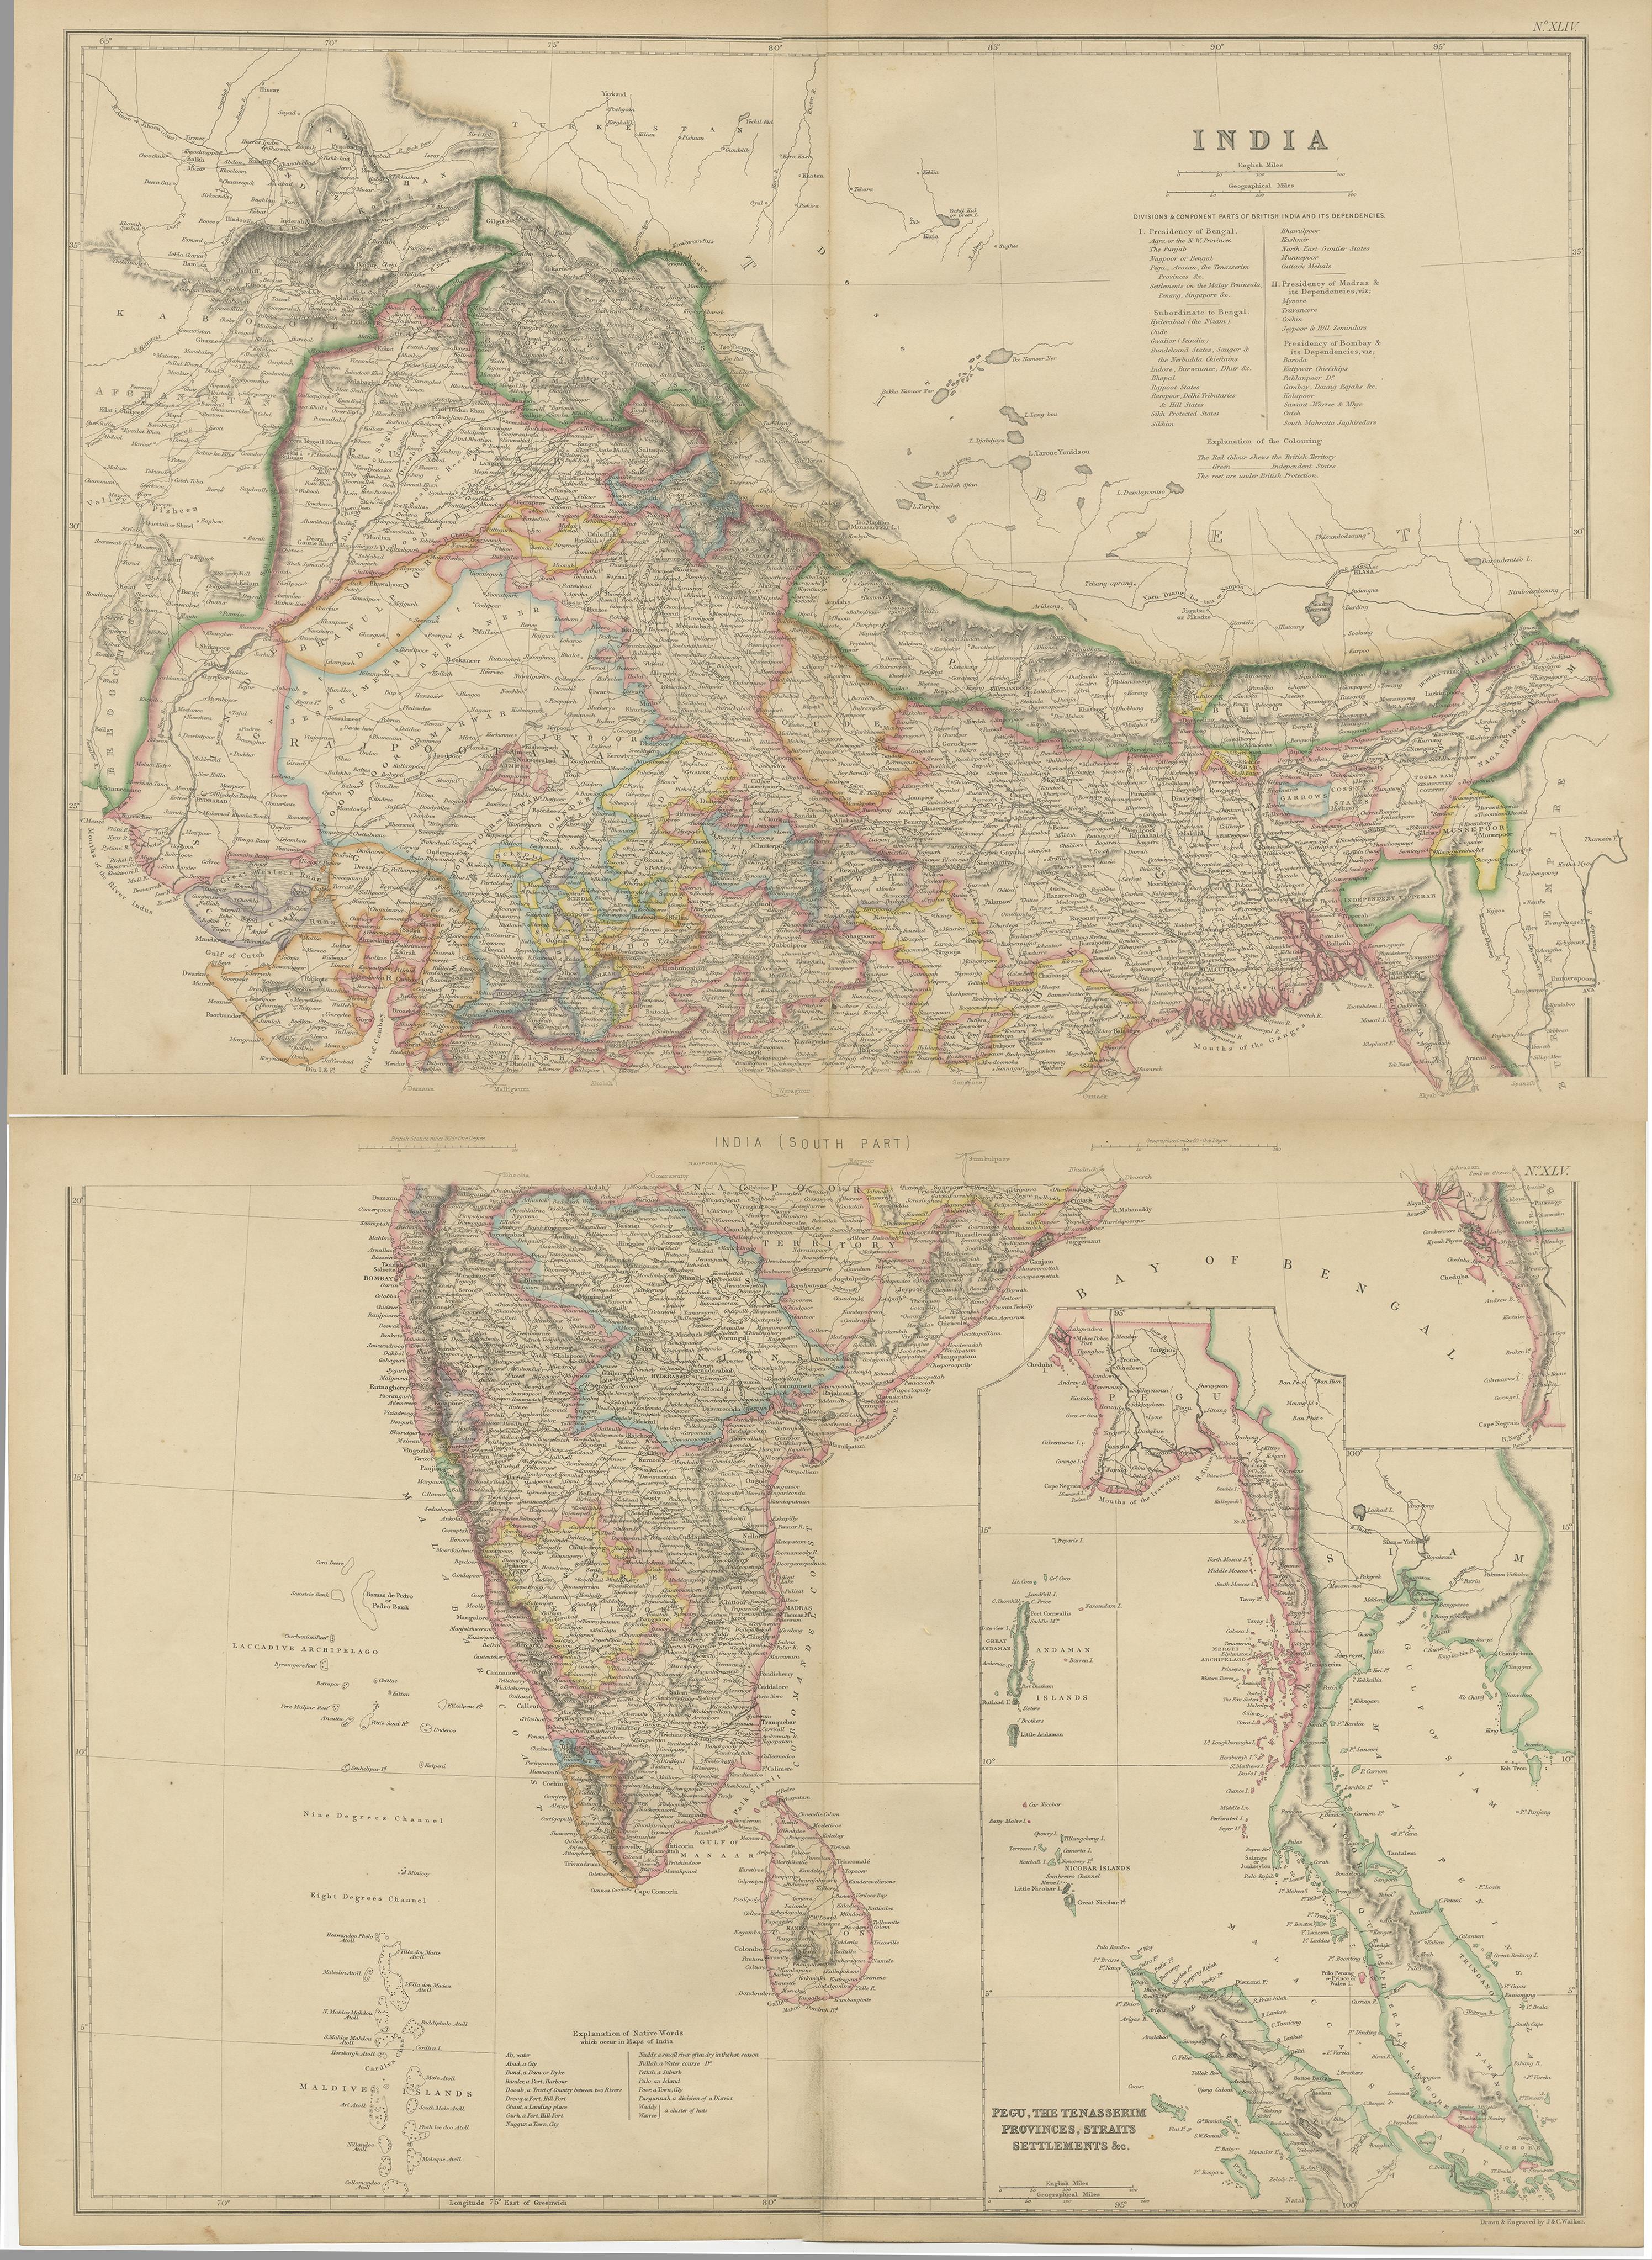 Antique map titled 'India'. Original antique map of India with inset maps of Pegu, the Tenasserim Provinces, straits settlements. This map originates from ‘The Imperial Atlas of Modern Geography’. Published by W. G. Blackie, 1859.

The 